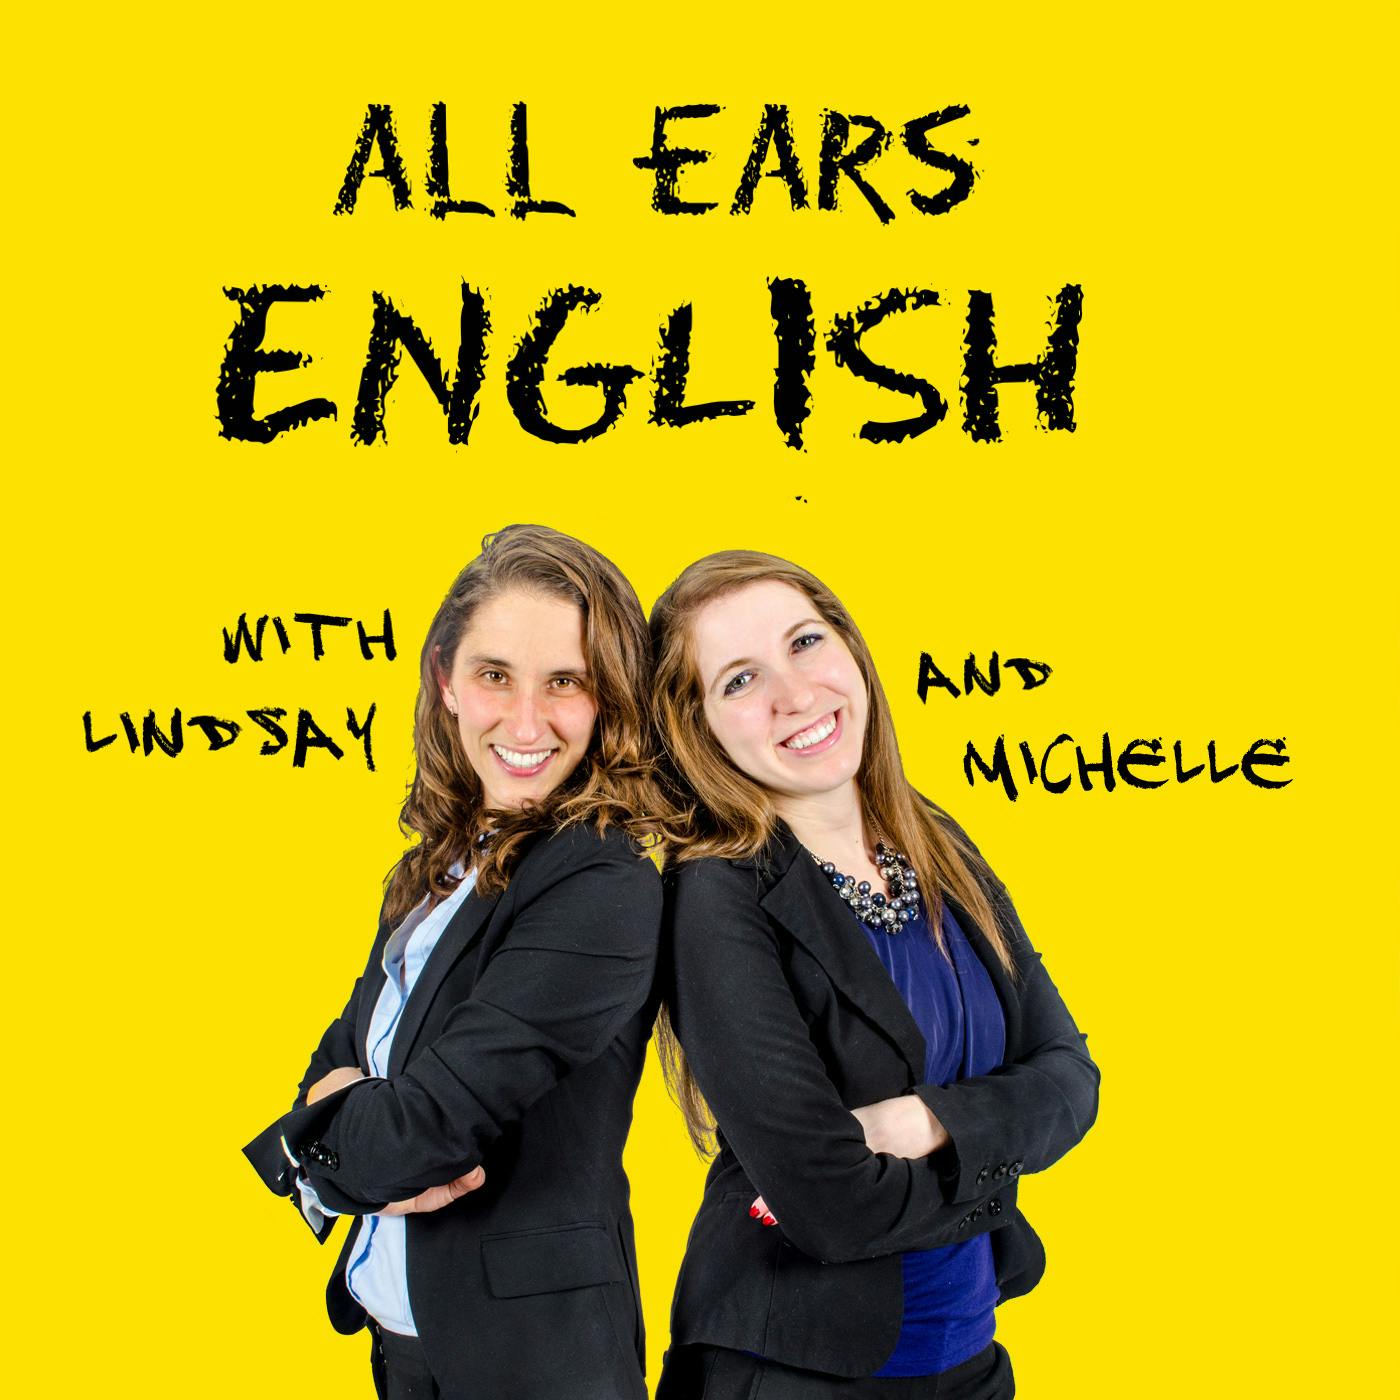 AEE 1380: Grammar Part 6: A Few Tips to Add a Little Polish to Your Job Interviews in English